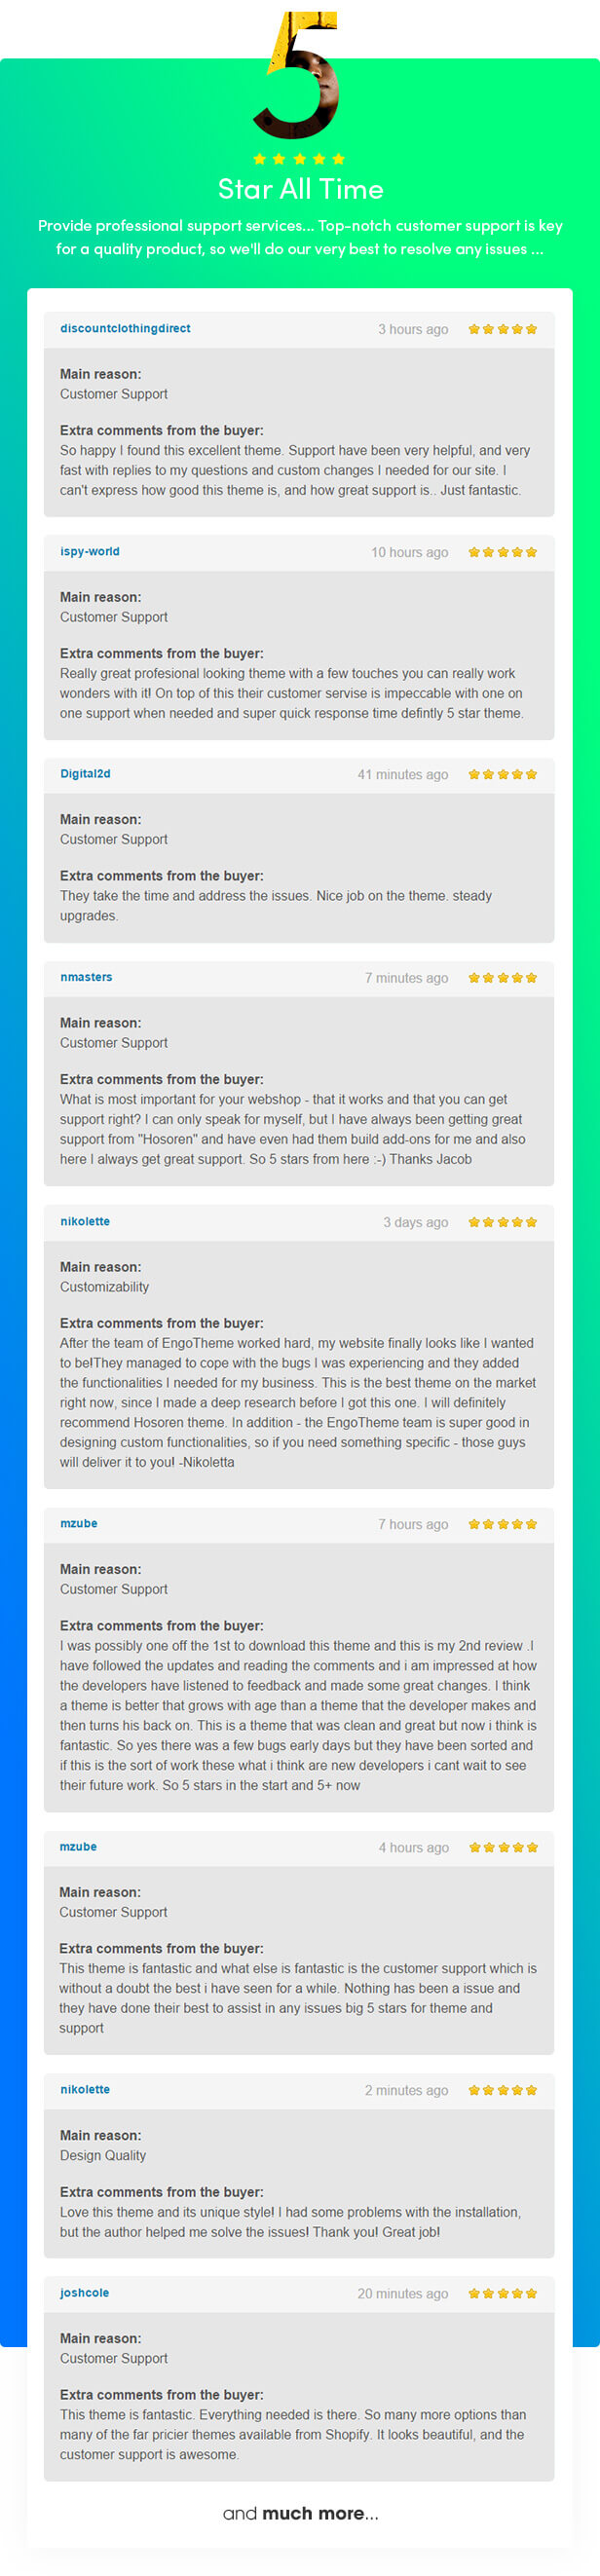 Ratings and reviews page.